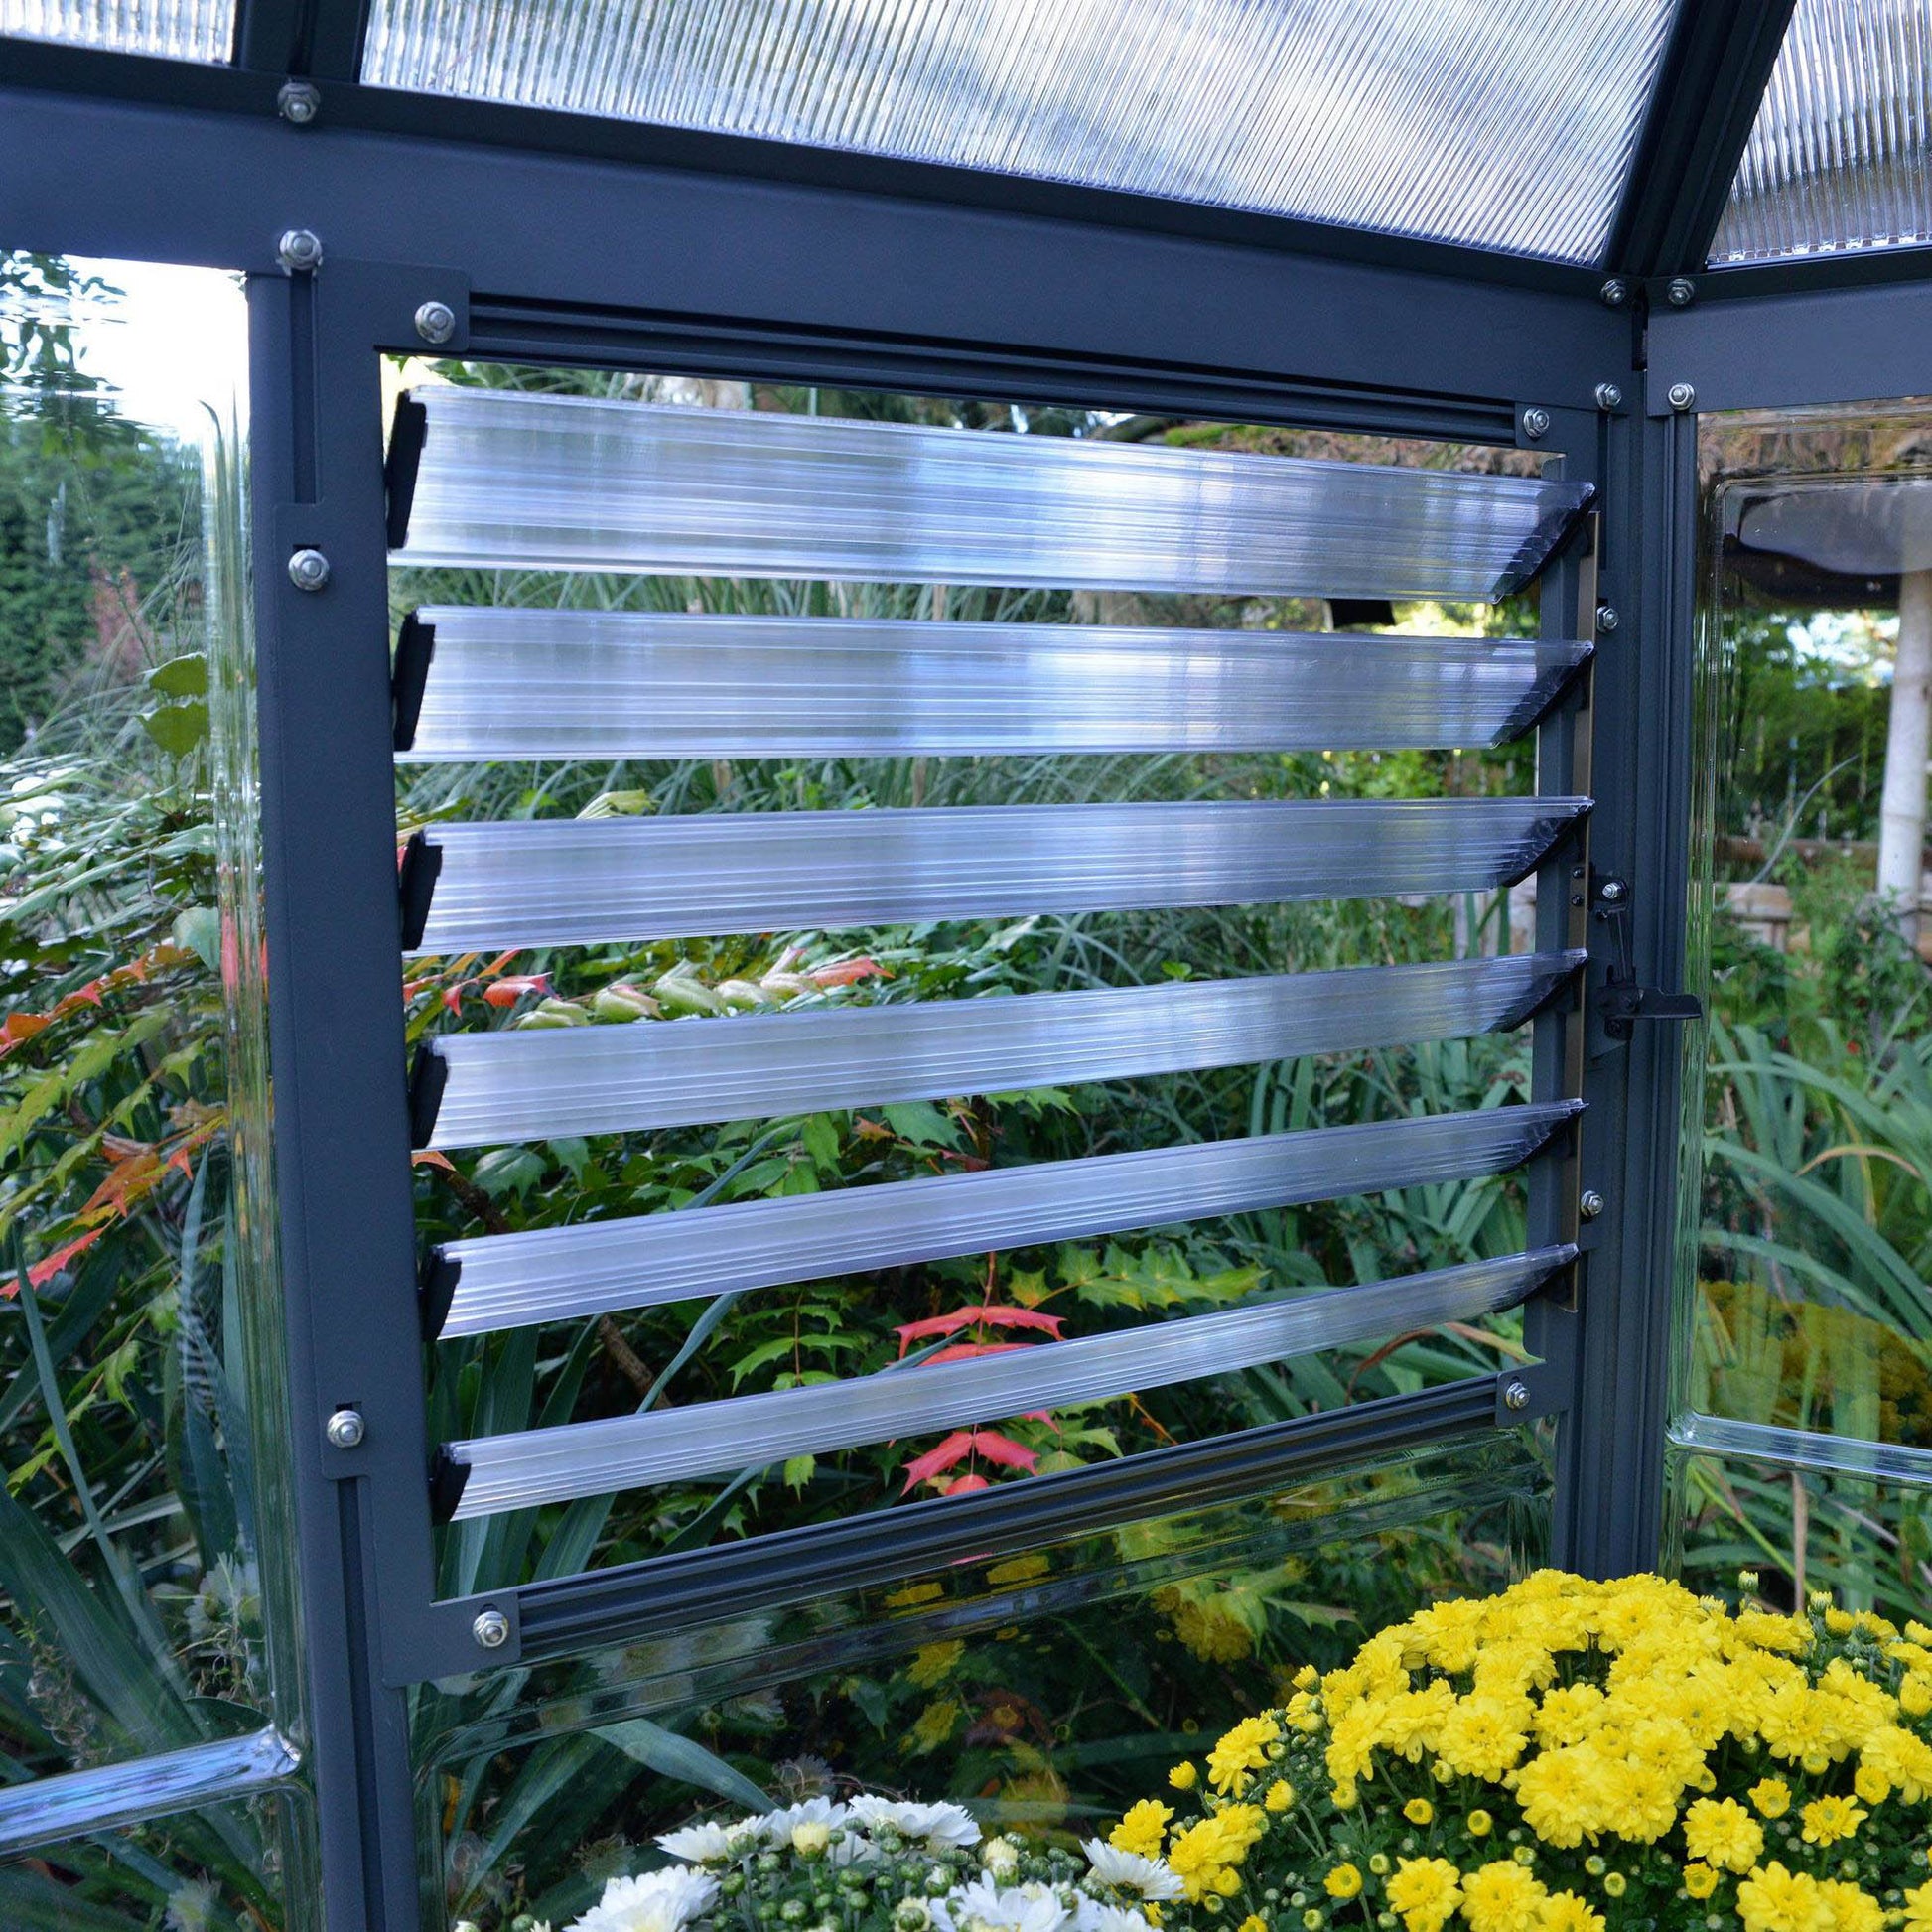 An opening air vent on a greenhouse